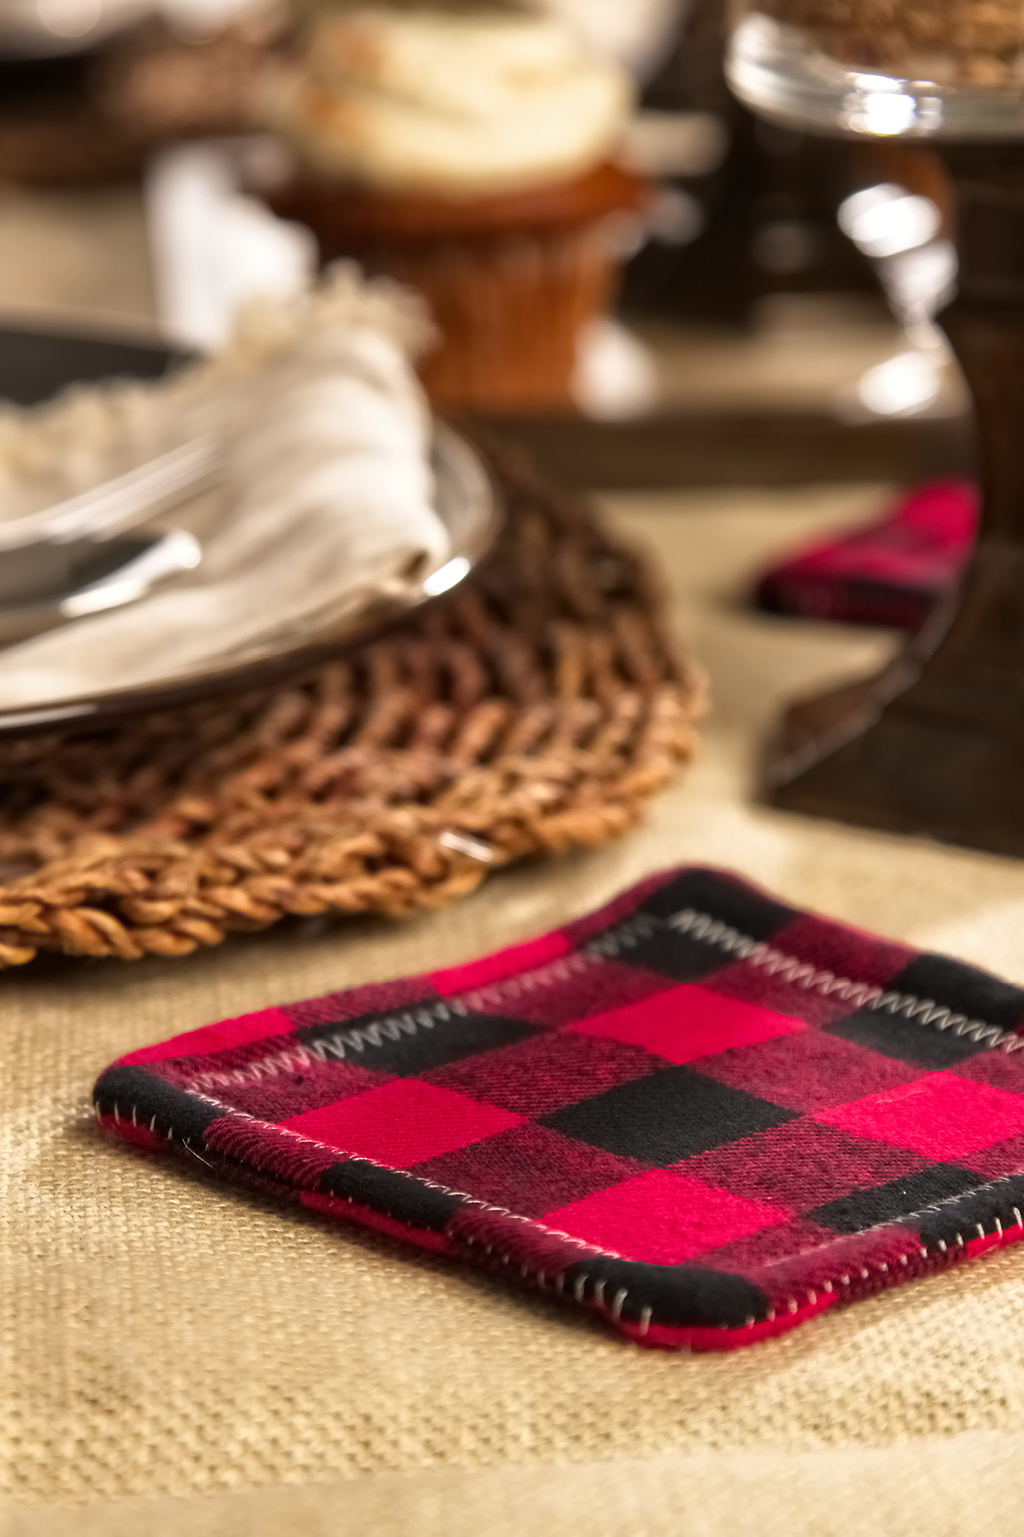 Red and black flannel coaster on table